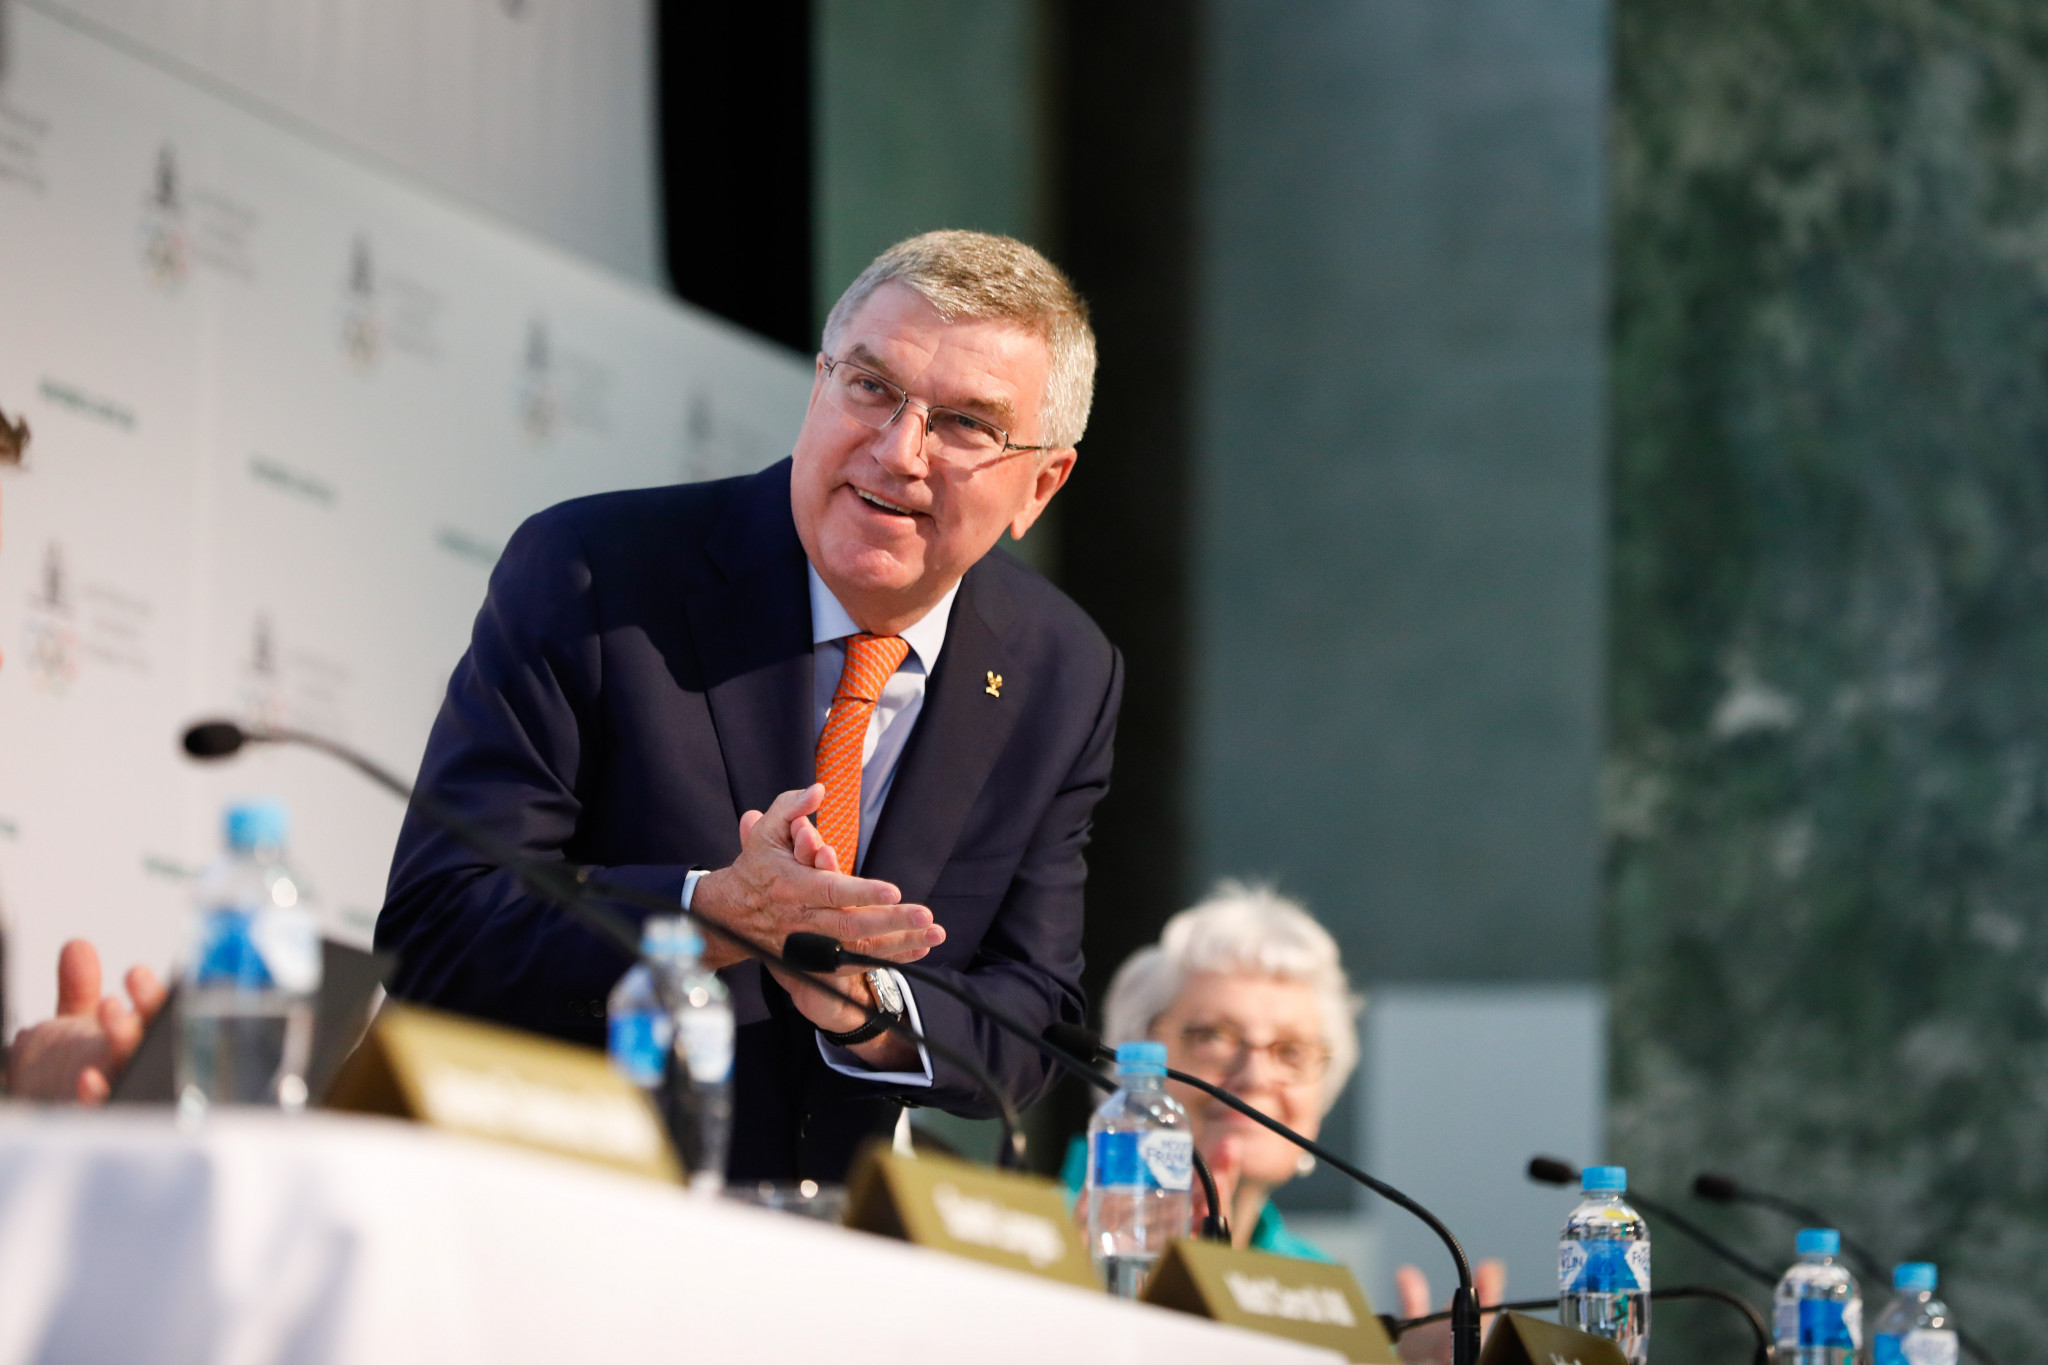 International Olympic Committee President Thomas Bach will attend the World Taekwondo Championships tomorrow ©Getty Images